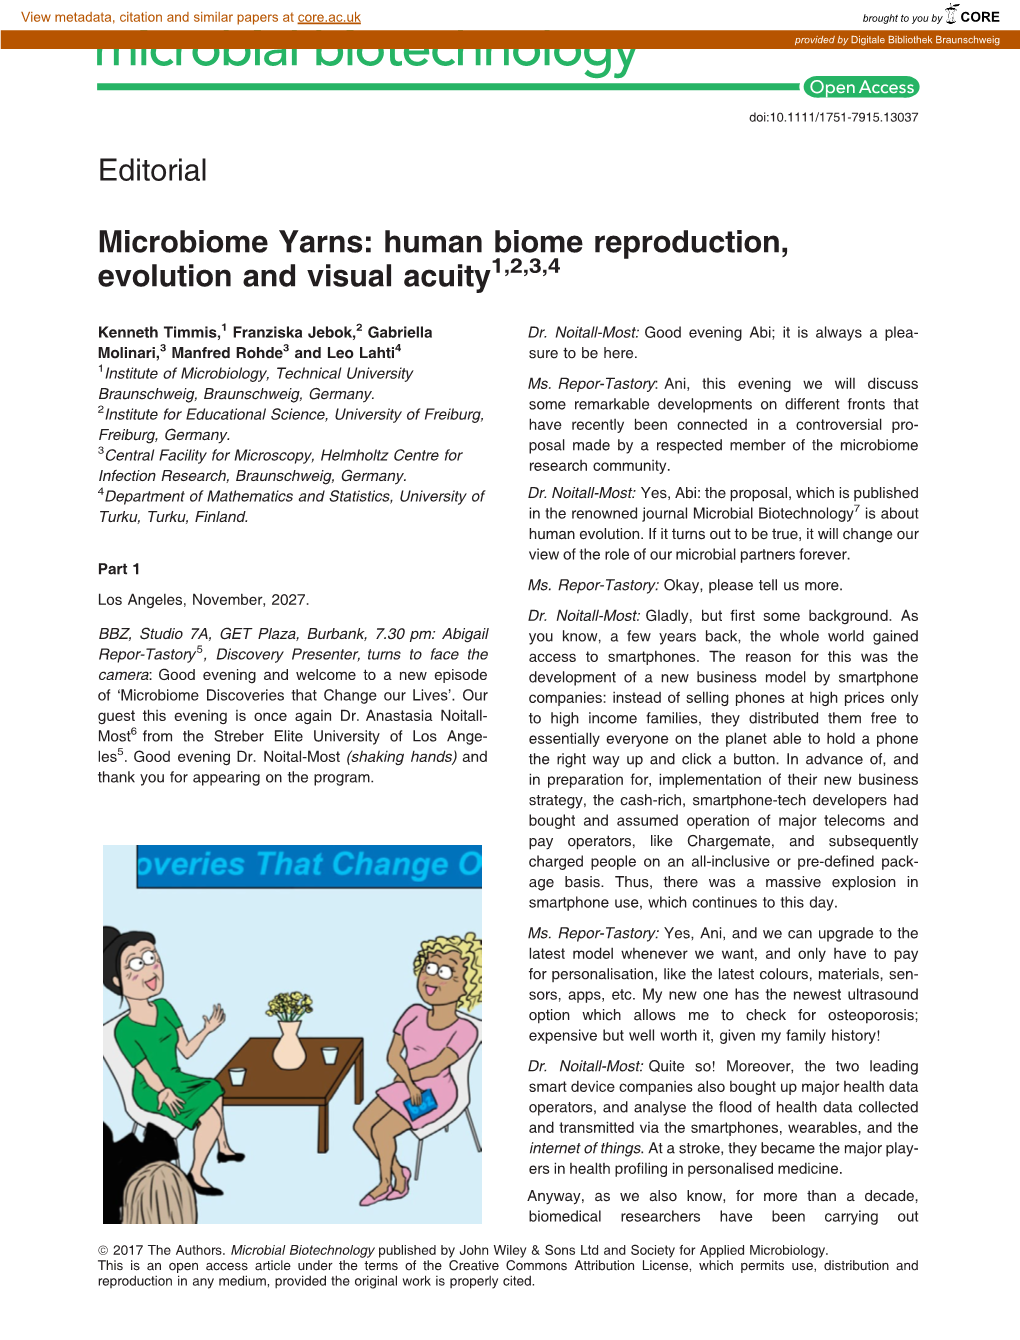 Human Biome Reproduction, Evolution and Visual Acuity1,2,3,4